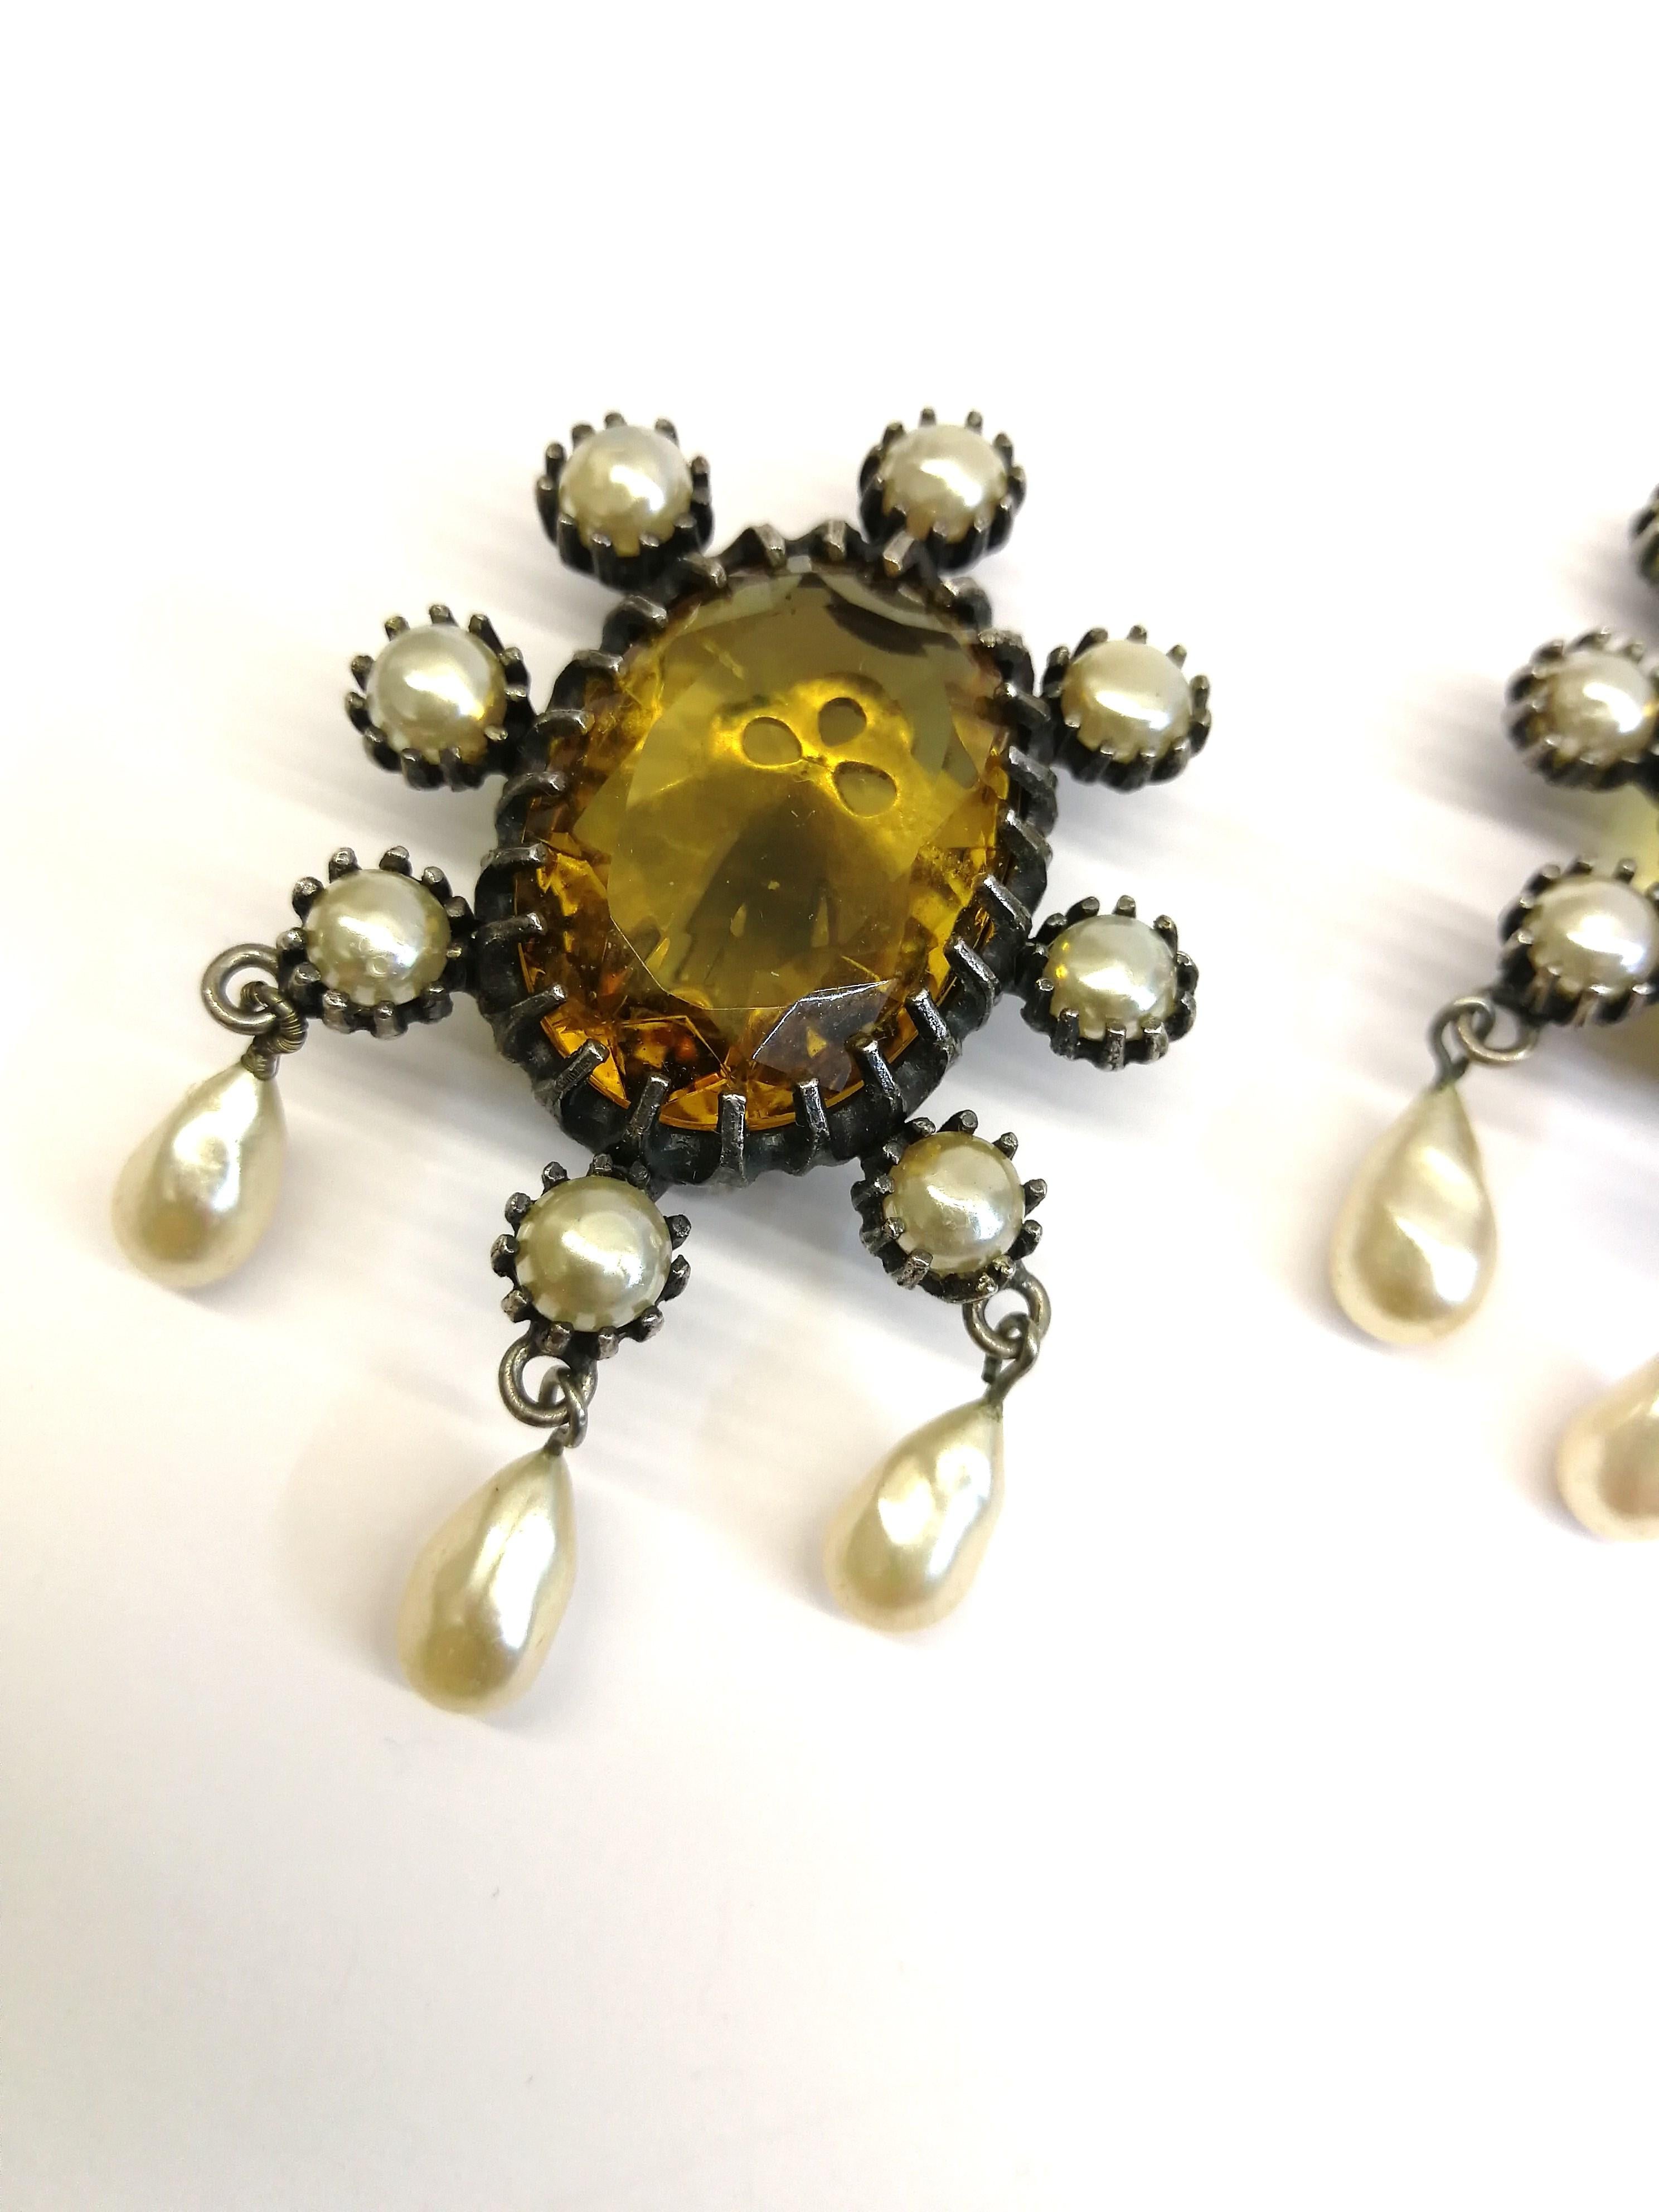 Large smokey quartz and pearl drop earrings, Mitchel Maer by Christian Dior. 5